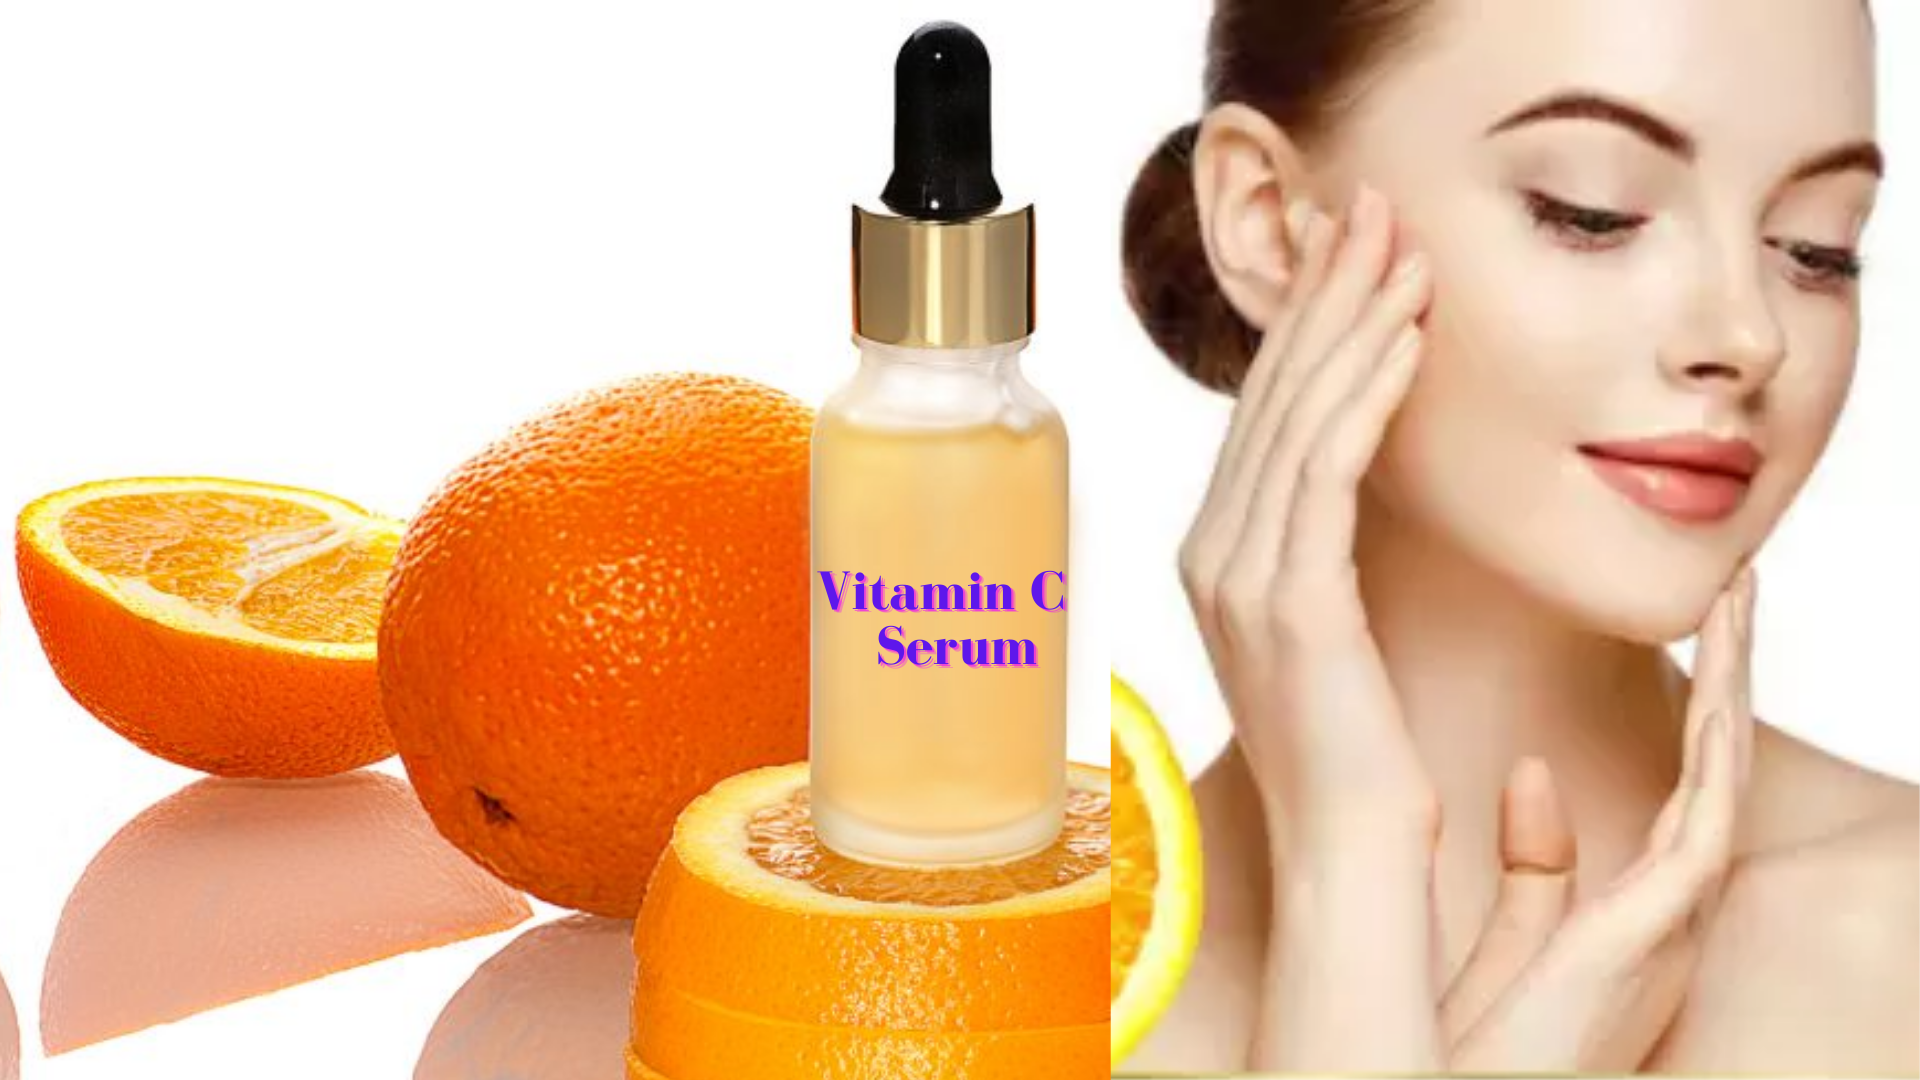 11 Best Vitamin C Serum Recommended By Dermatologists In India 2022